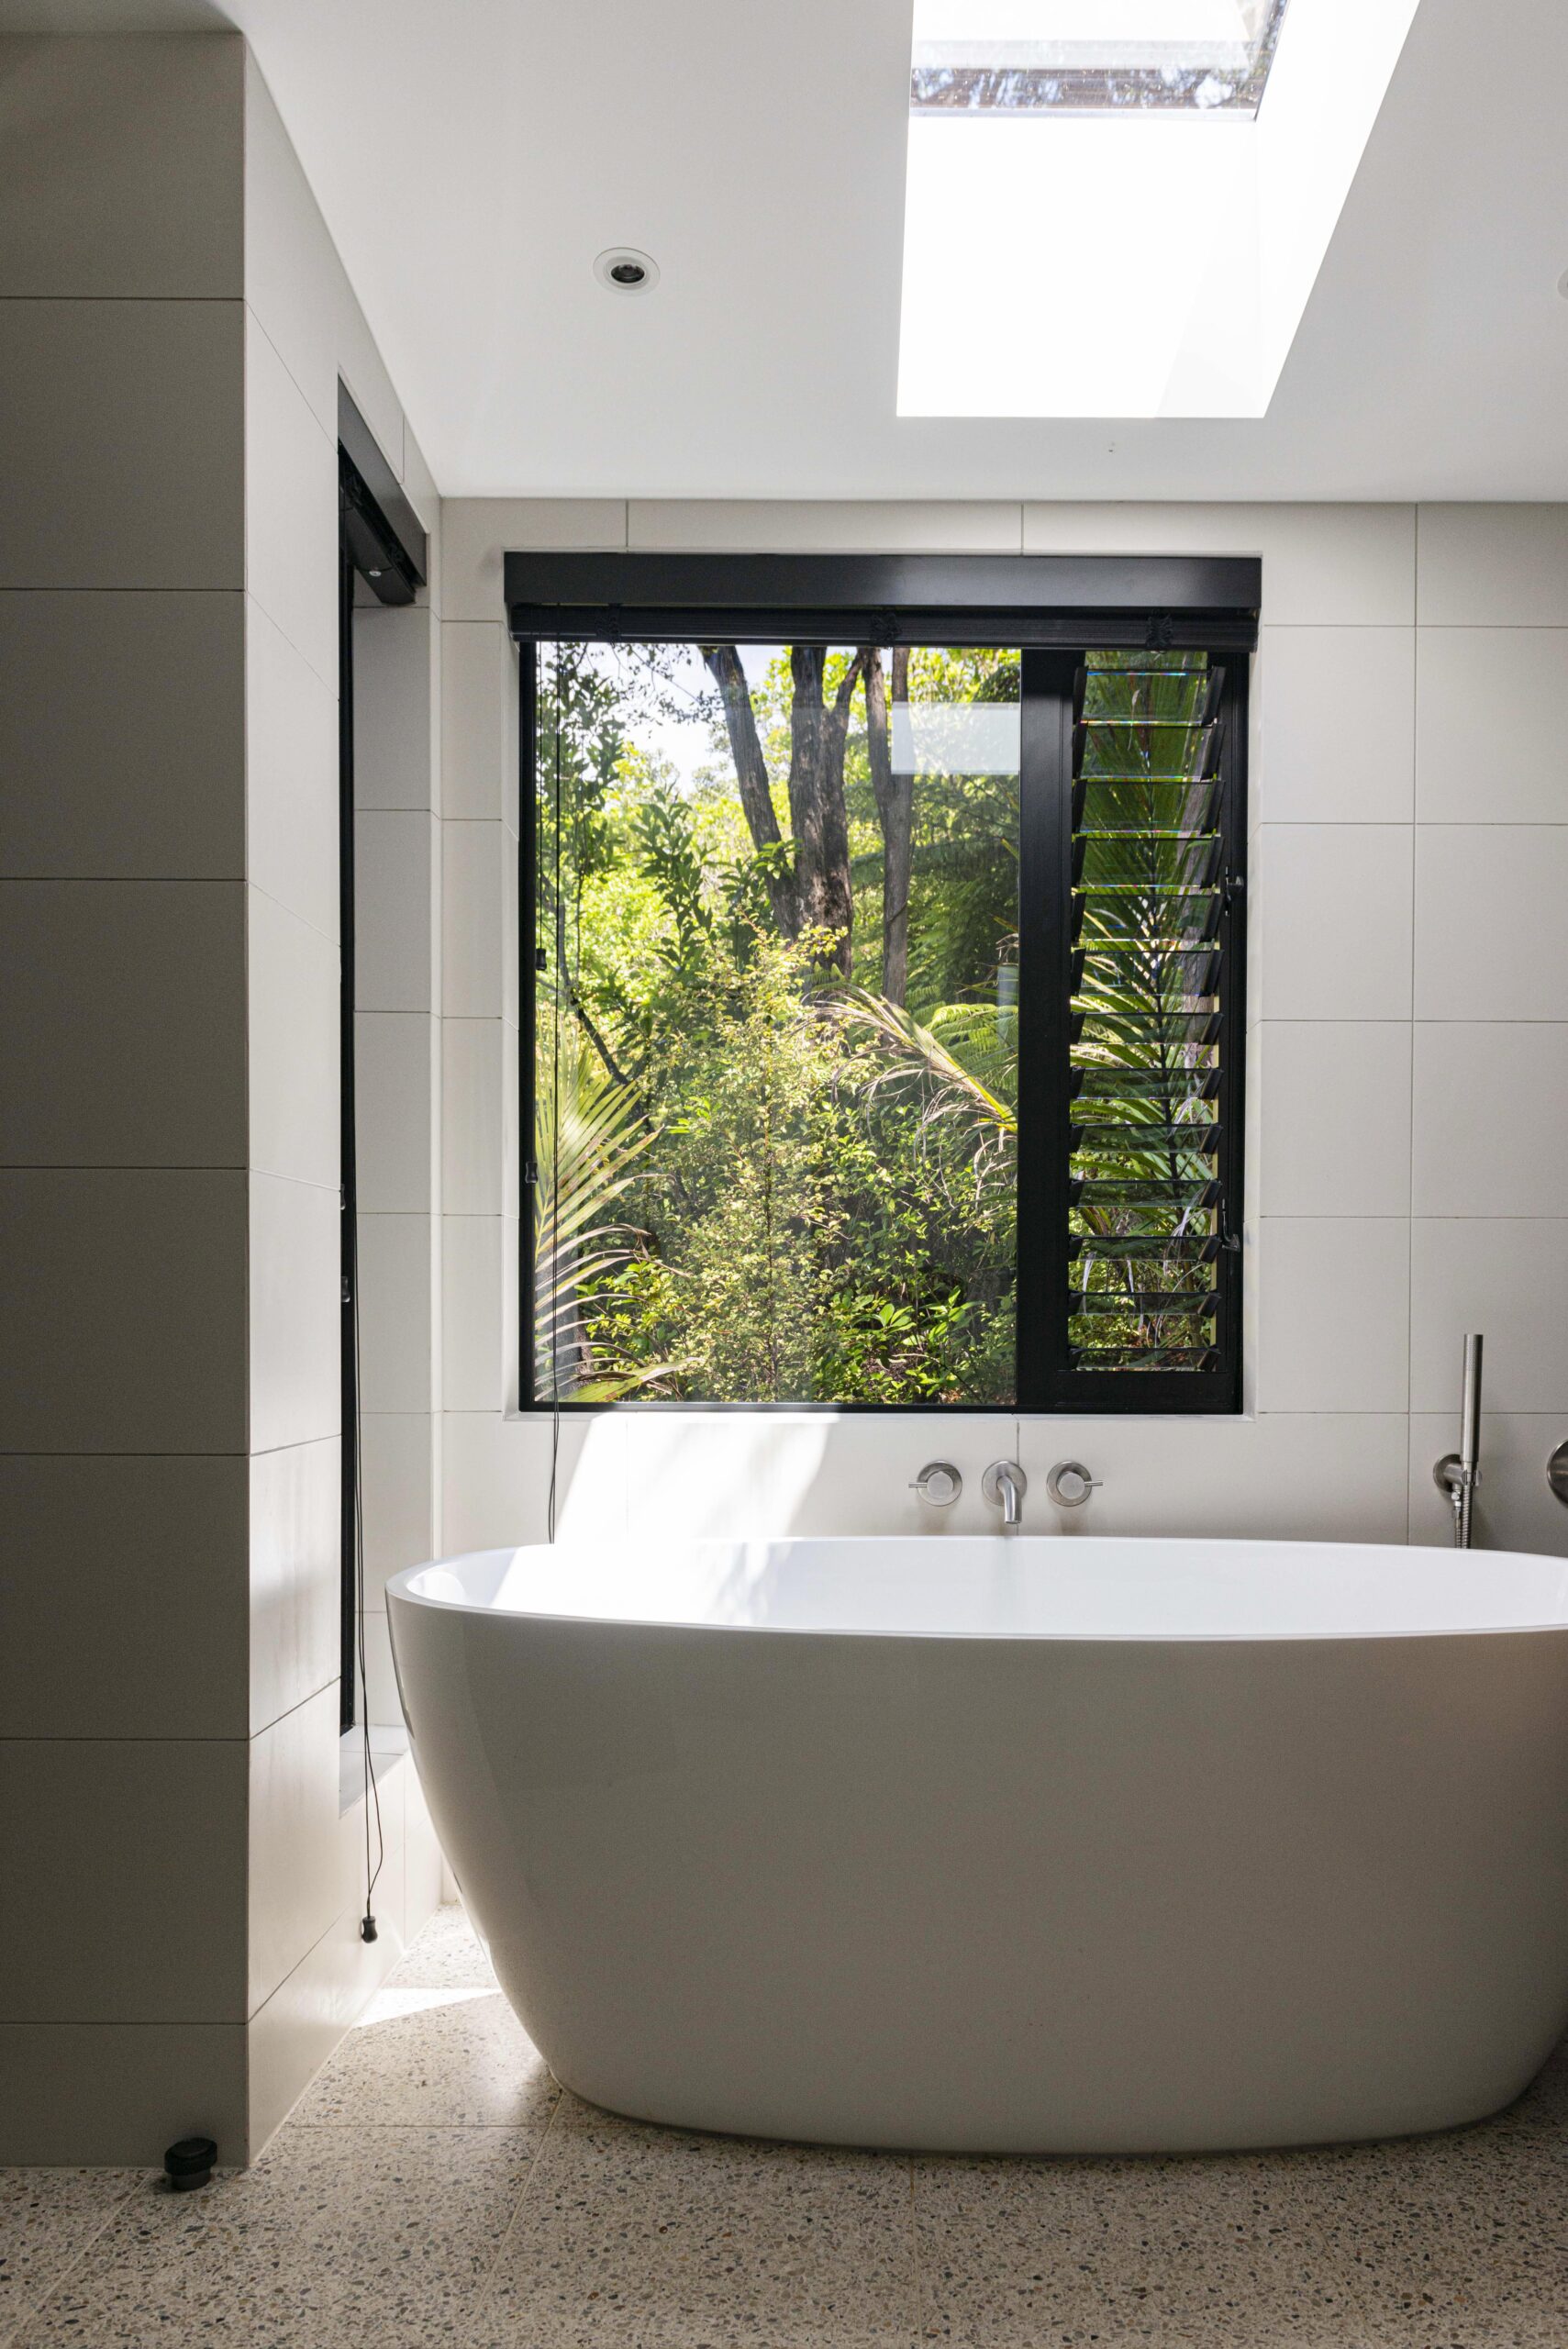 A white bath sitting in front of a large window to allow nature inside